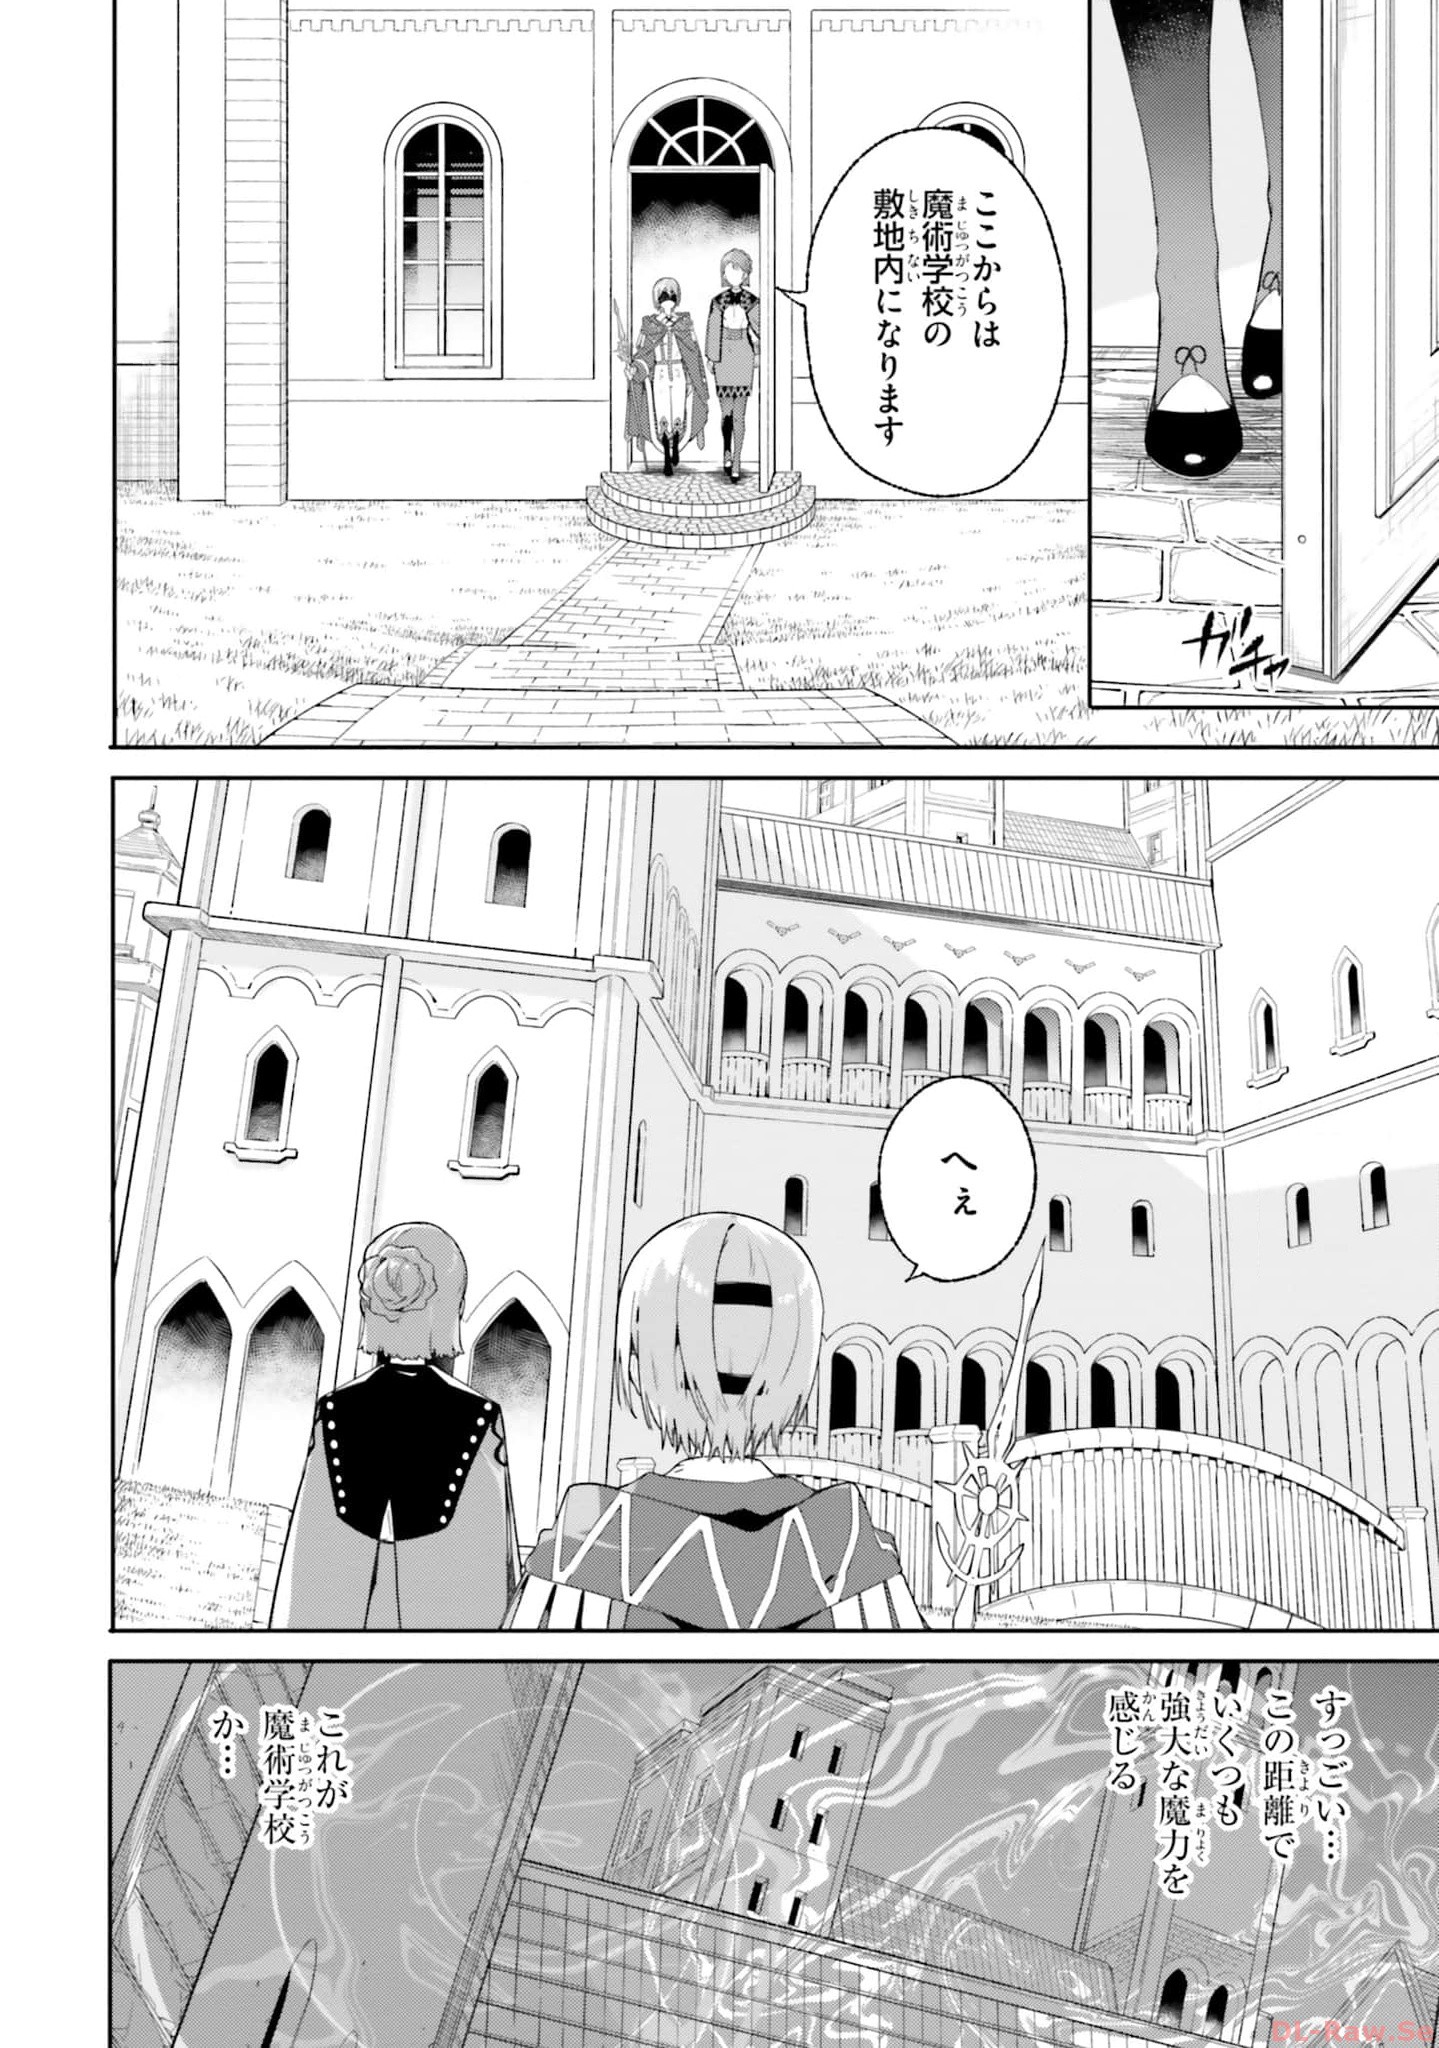 Kunon the Sorcerer Can See Kunon the Sorcerer Can See Through 魔術師クノンは見えている 第15話 - Page 10